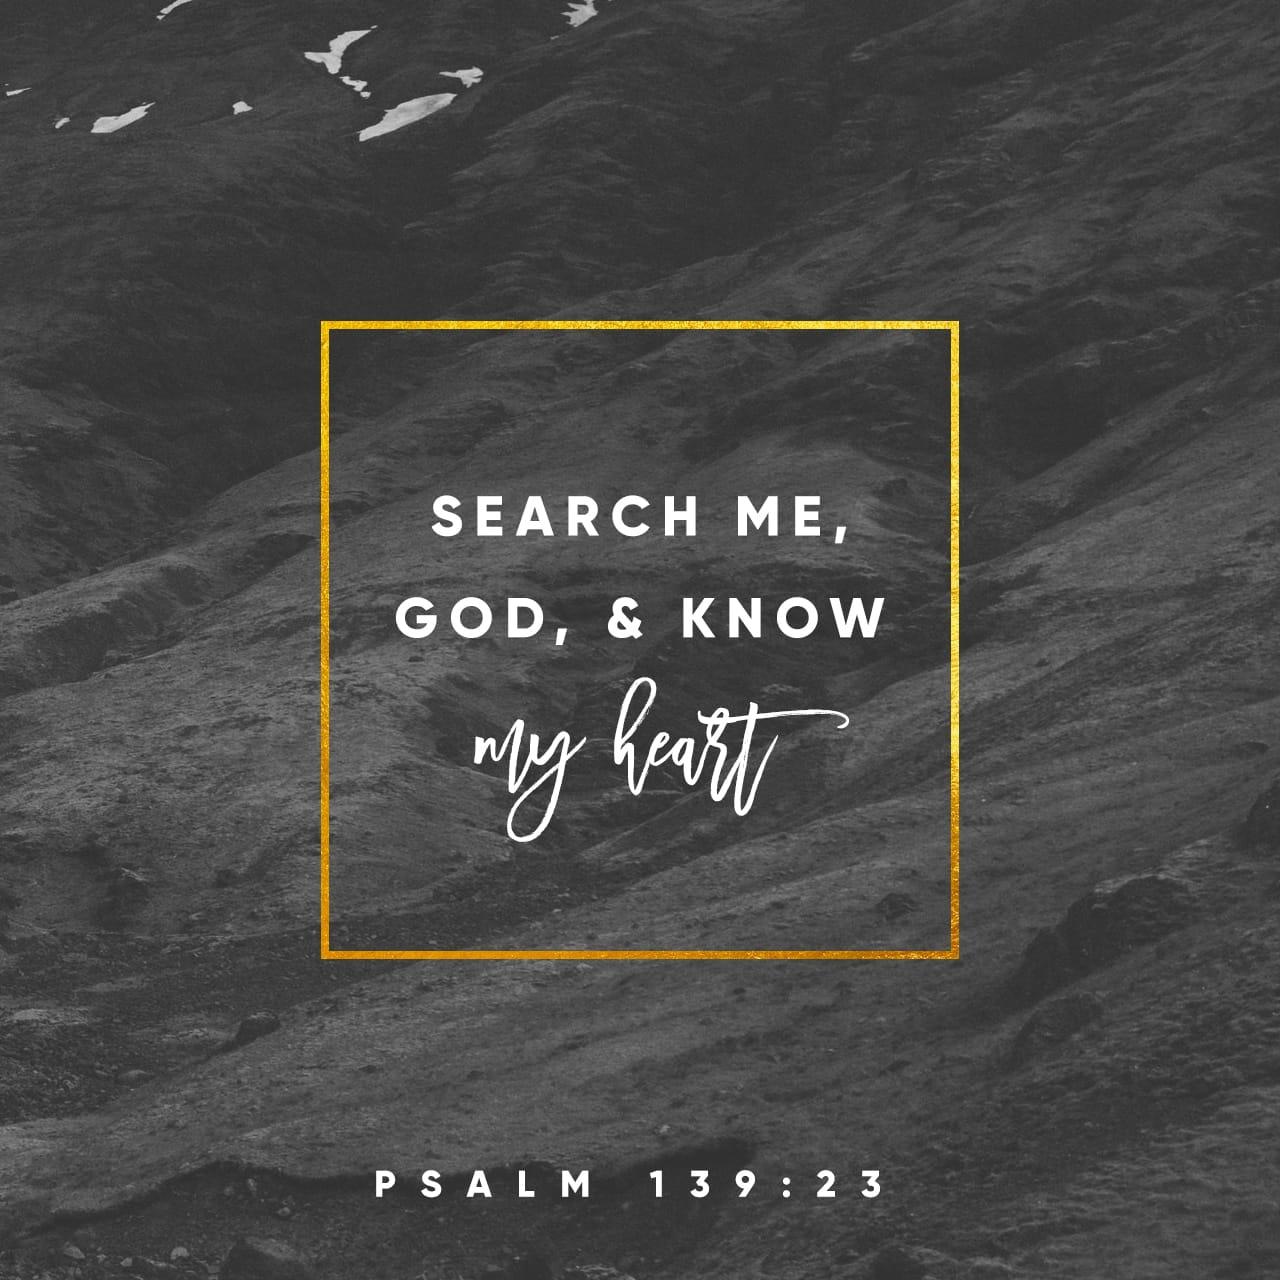 Bible Verse of the Day - day 153 - image 2417 (Psalms 139:23-24)